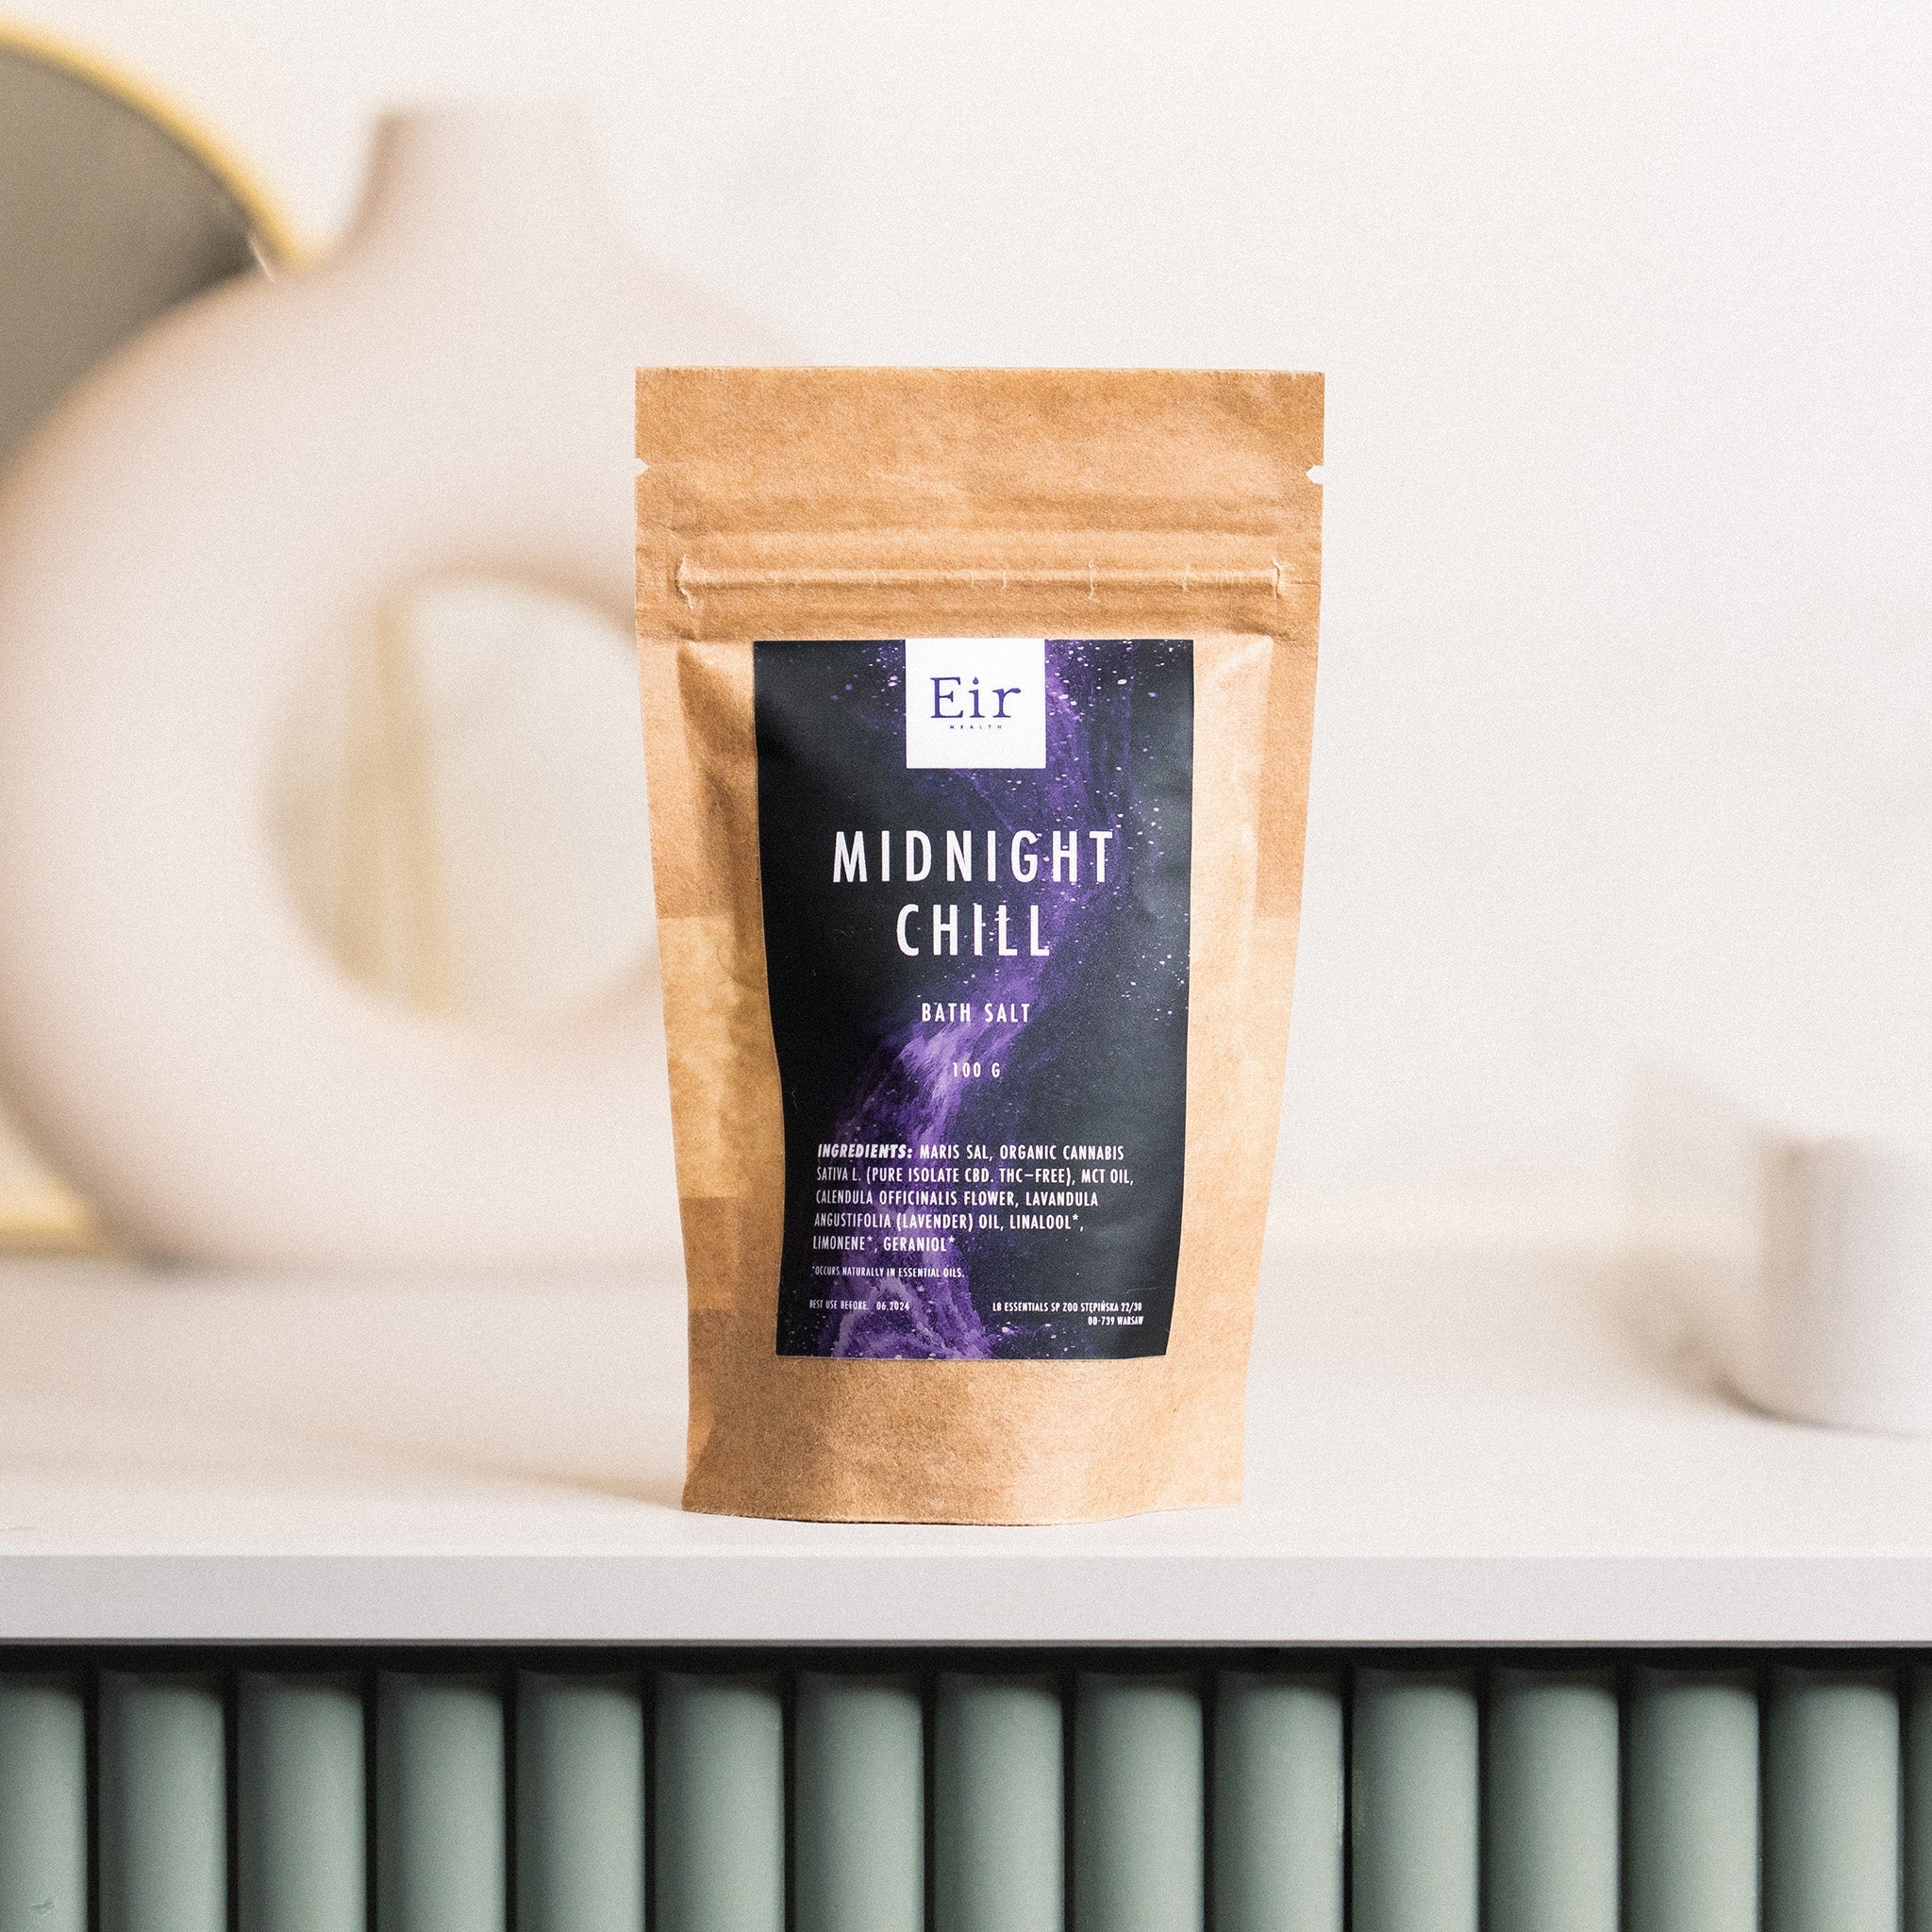 Packaging of Eir's "Midnight Chill" bath salt, a brown paper pouch with a window and a deep purple label featuring cosmic-themed graphics.